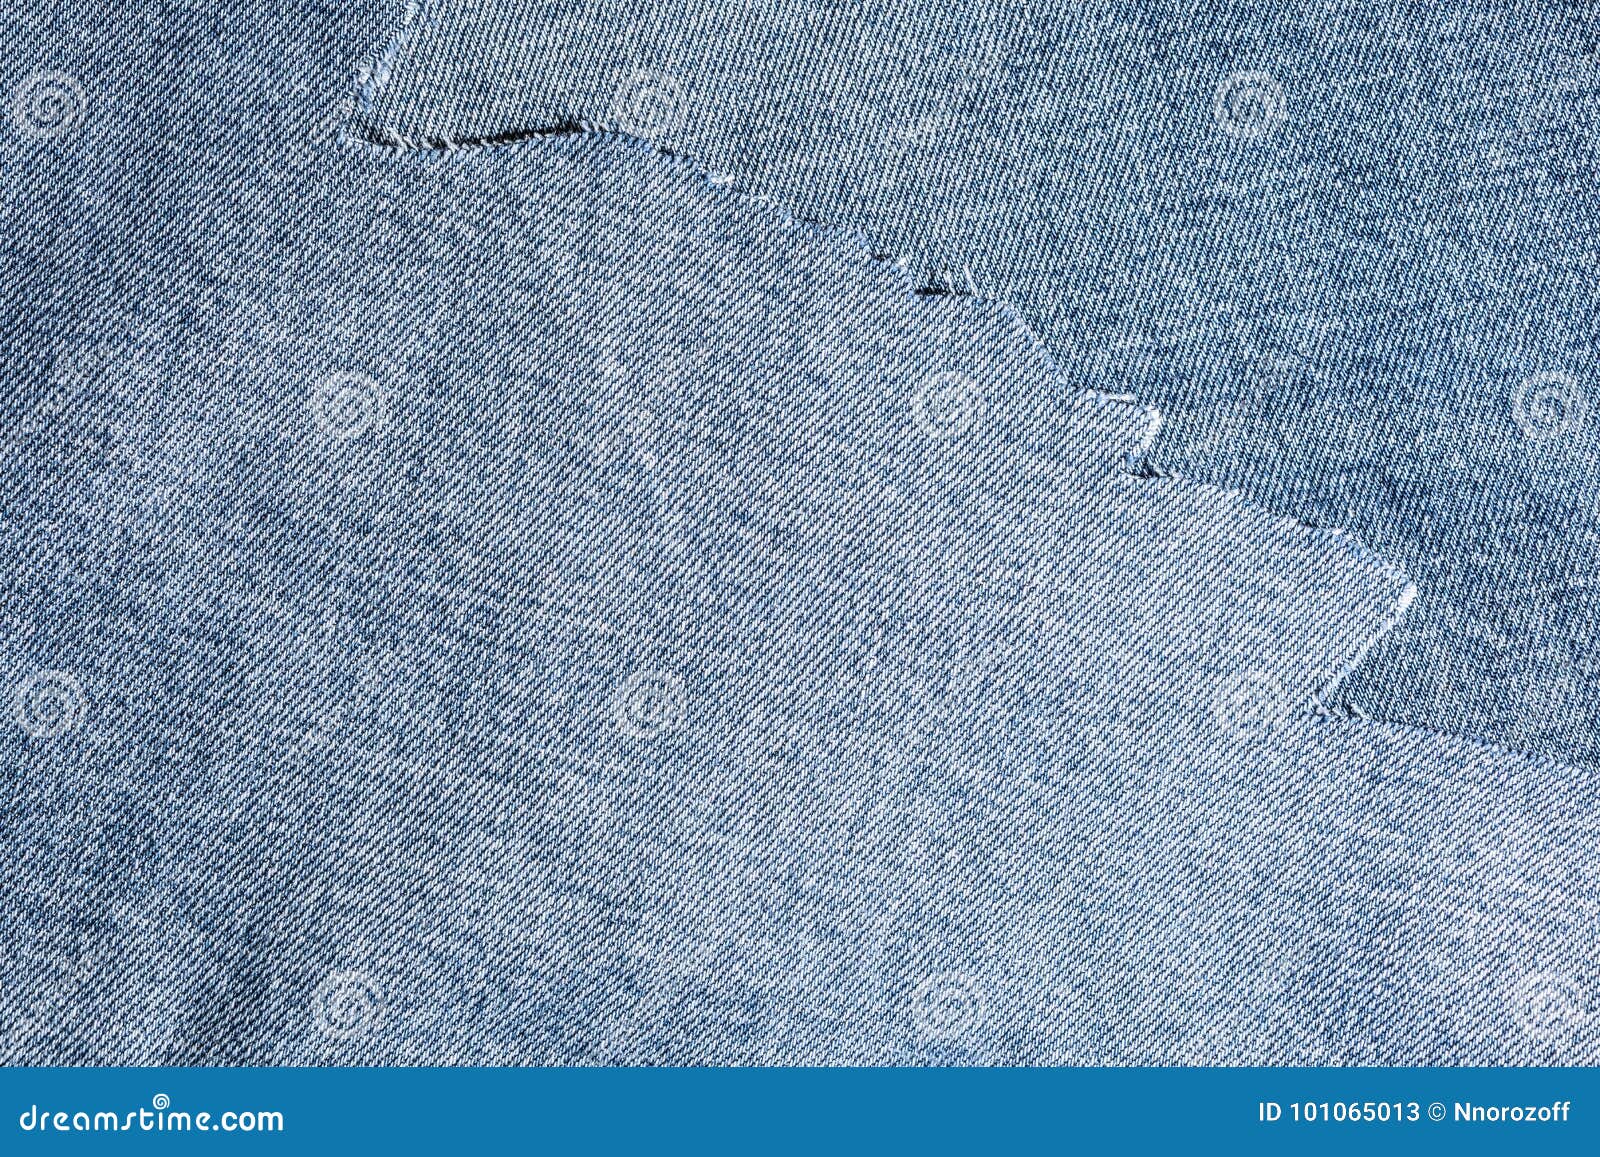 Shreds of Denim Fabric, Unevenly Cut Jeans Stock Image - Image of ...